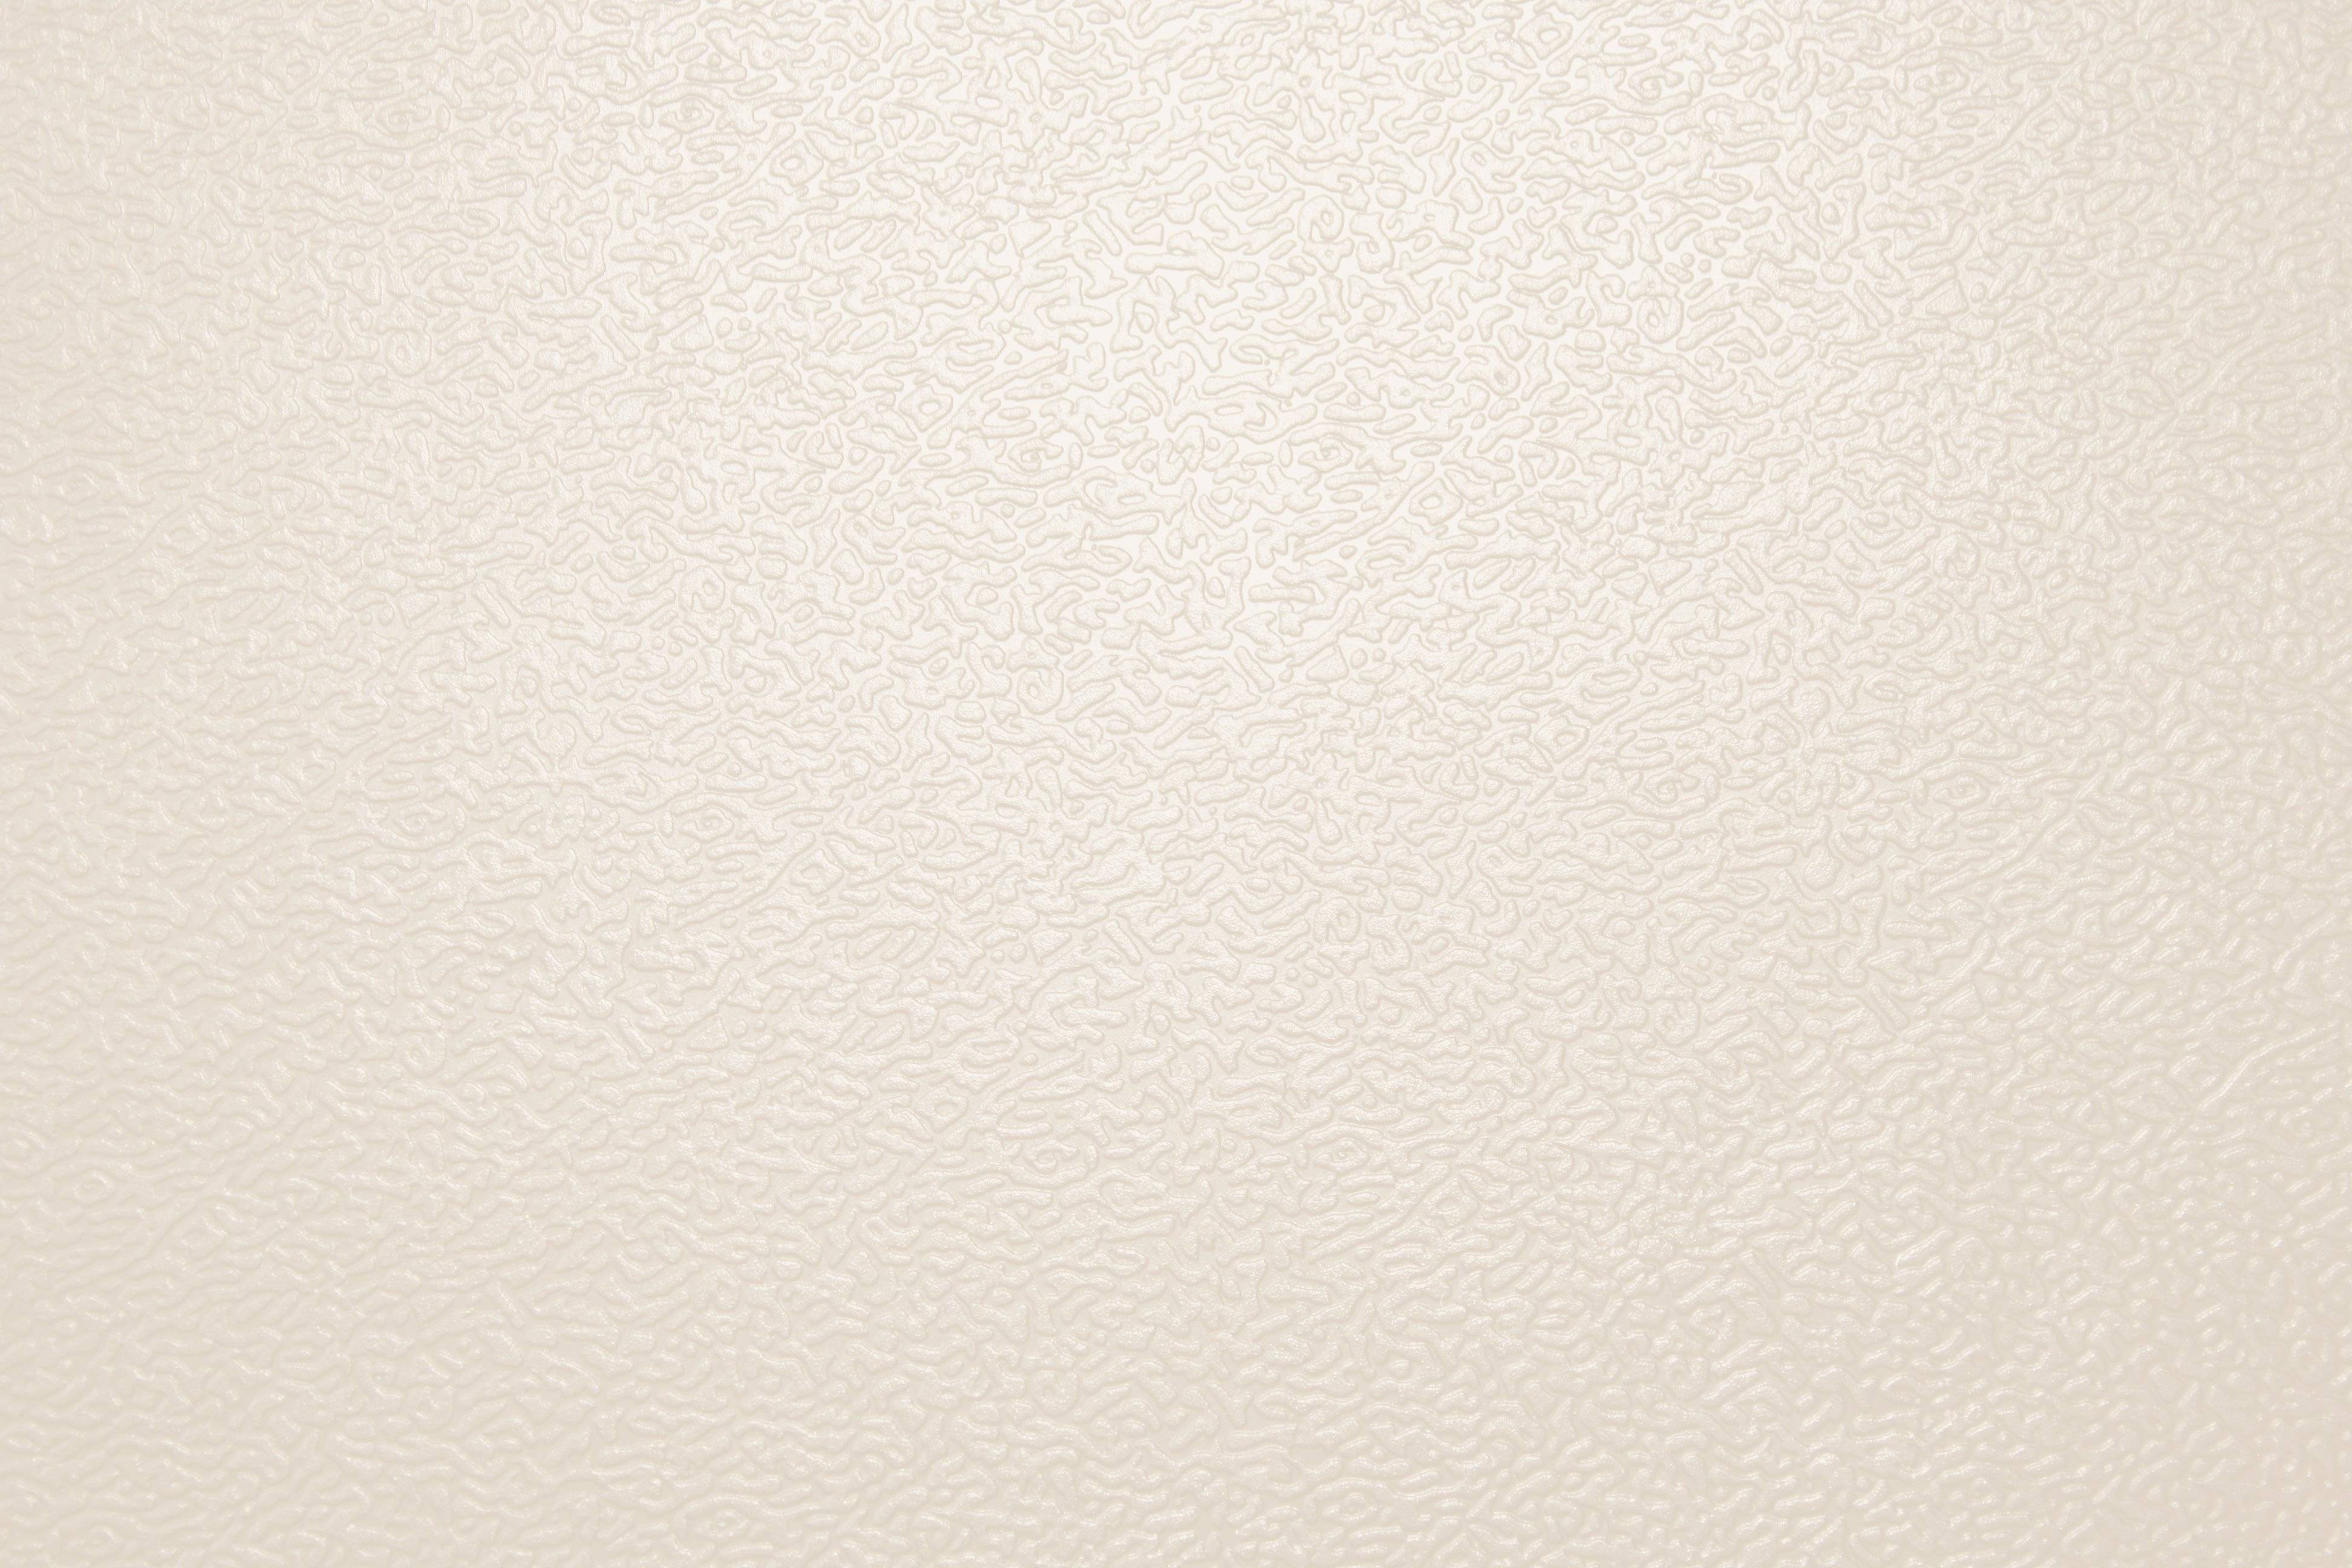 Cream Colored Backgrounds